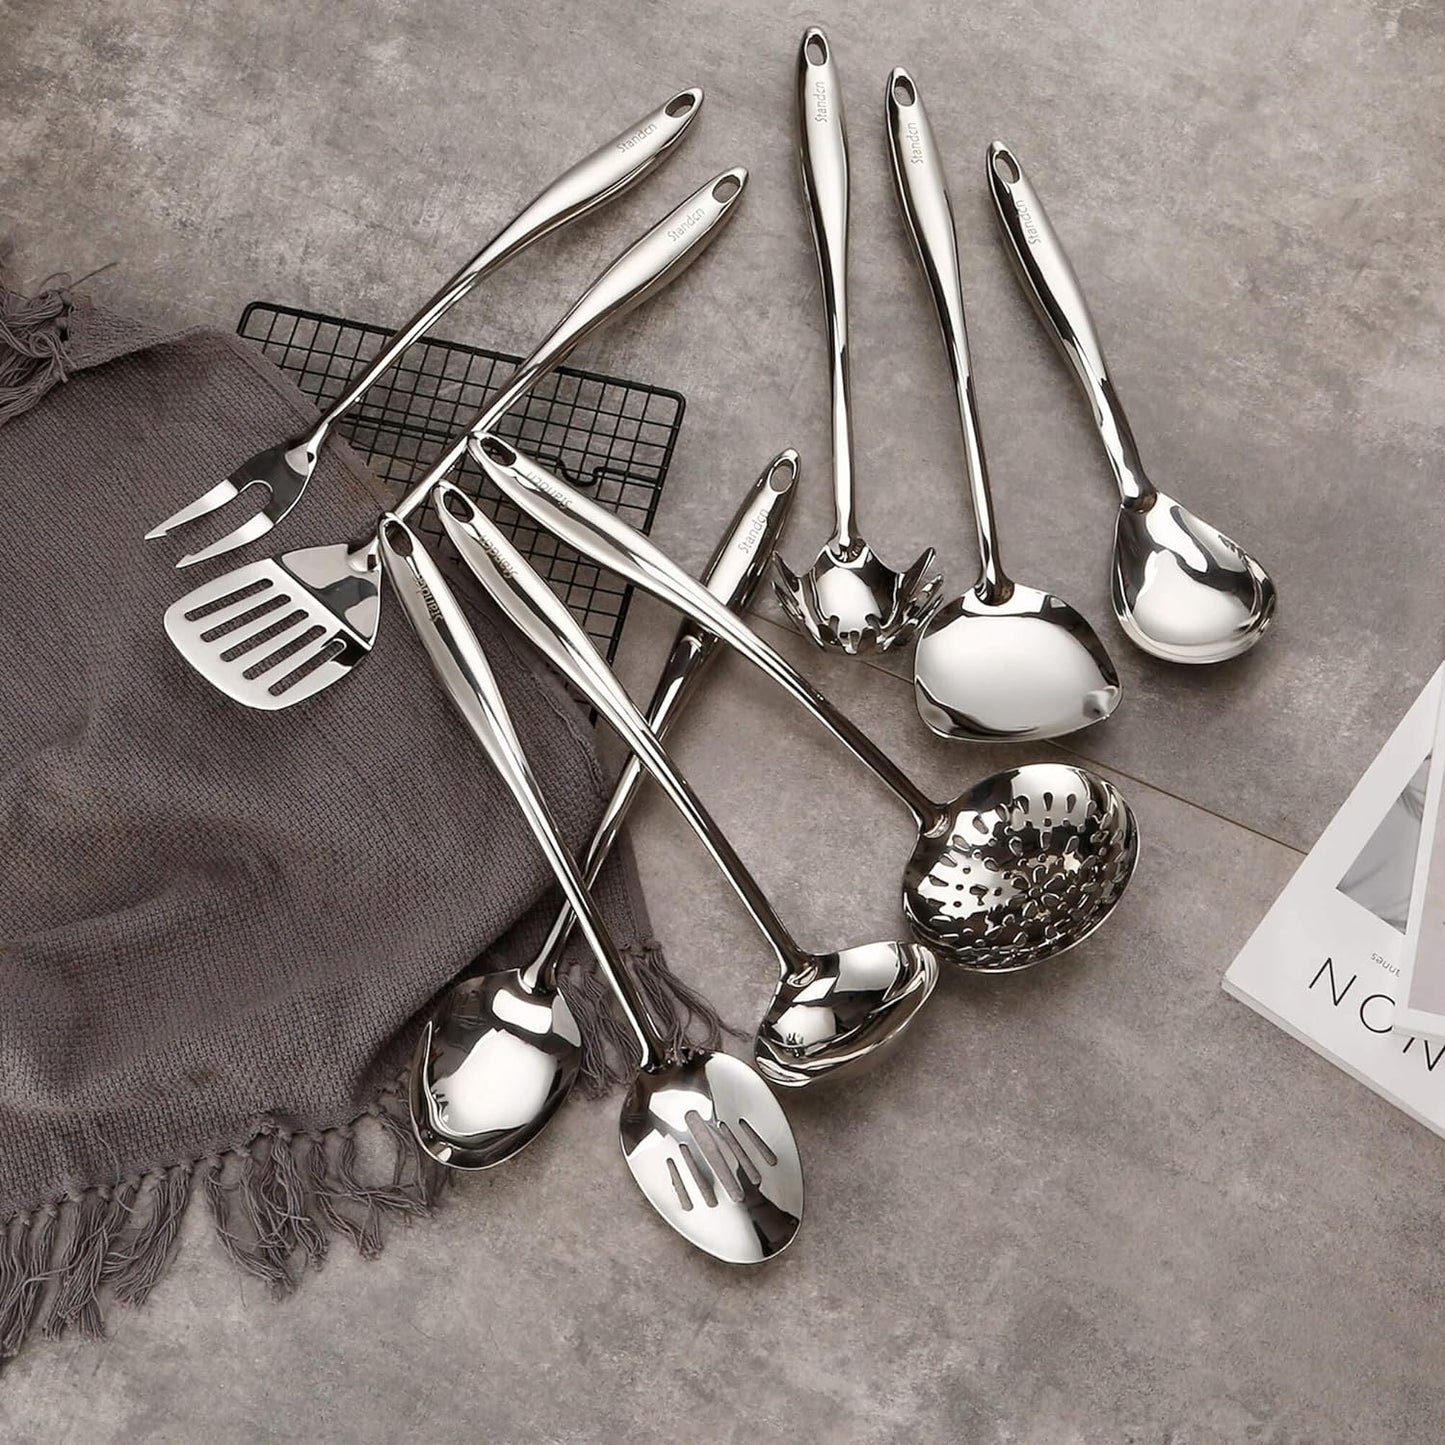 304 Stainless Steel Kitchen Utensil Set - 9 PCS Serving Utensils, Cooking Utensil, Solid Spoon, Slotted Spoon, Fork, Spatula, Ladle, Skimmer Spoon, Slotted Spatula Tunner, Spaghetti Spoon, Large Spoon